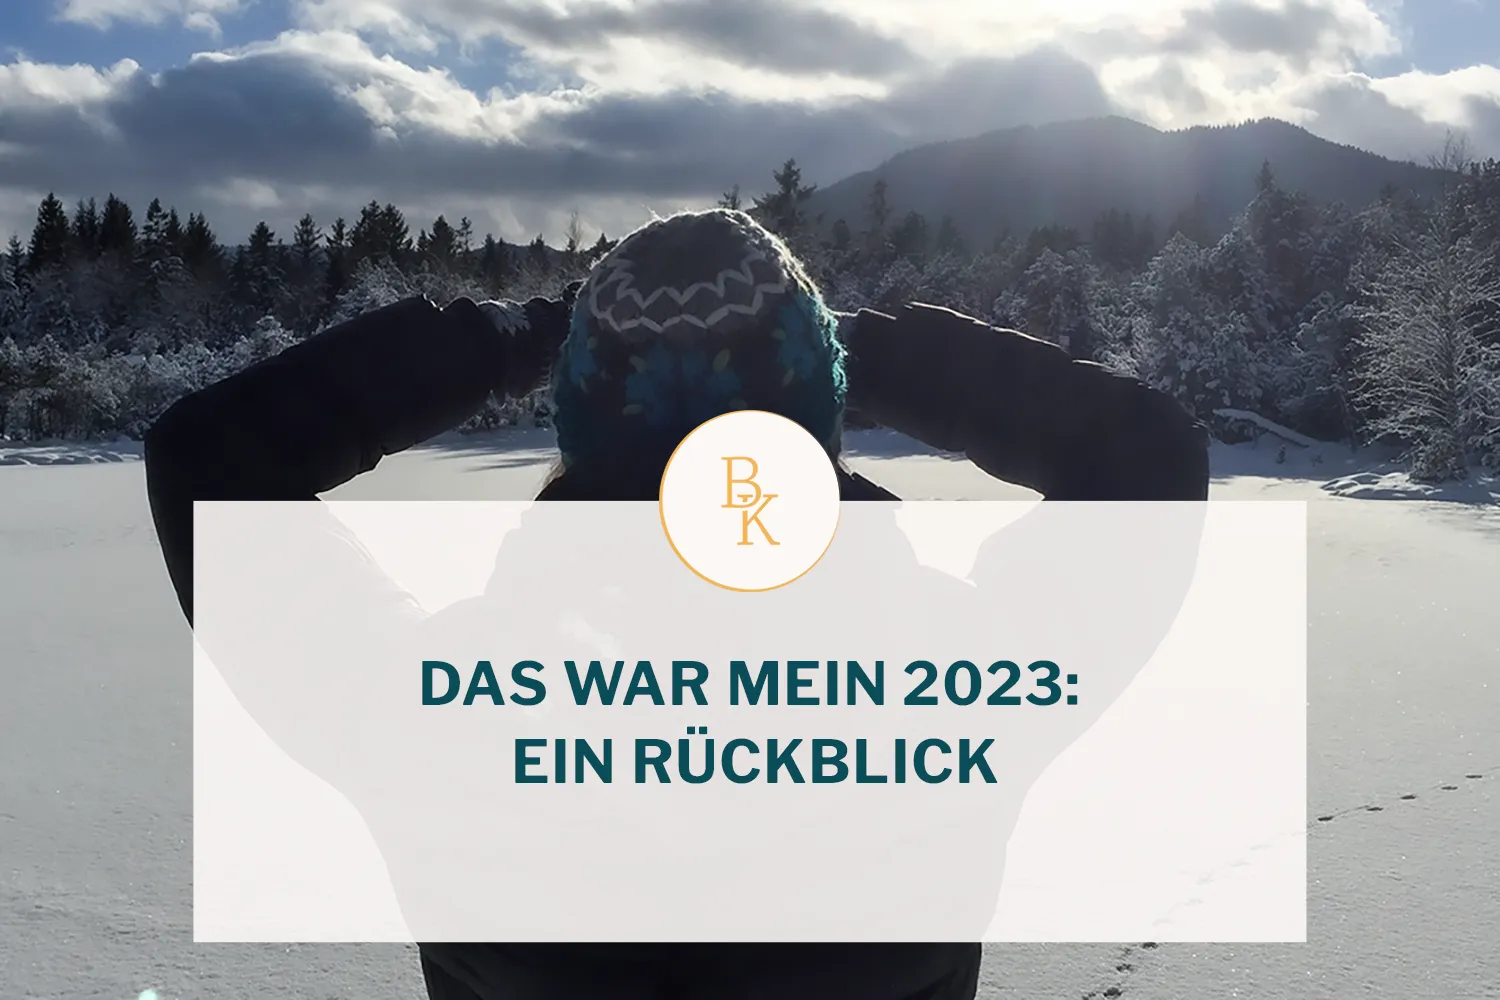 You are currently viewing Das war mein 2023